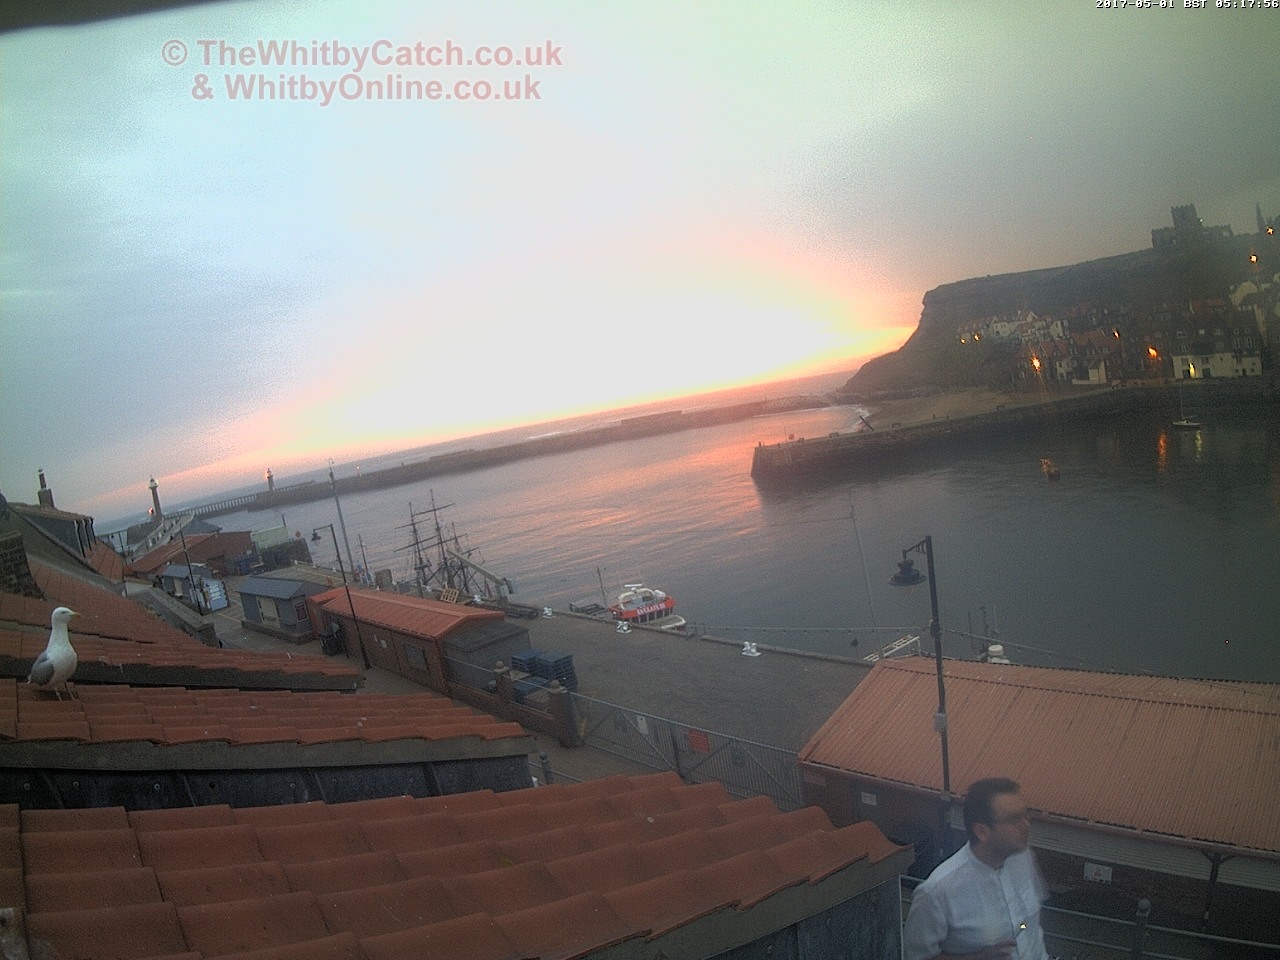 Whitby Mon 1st May 2017 05:18.